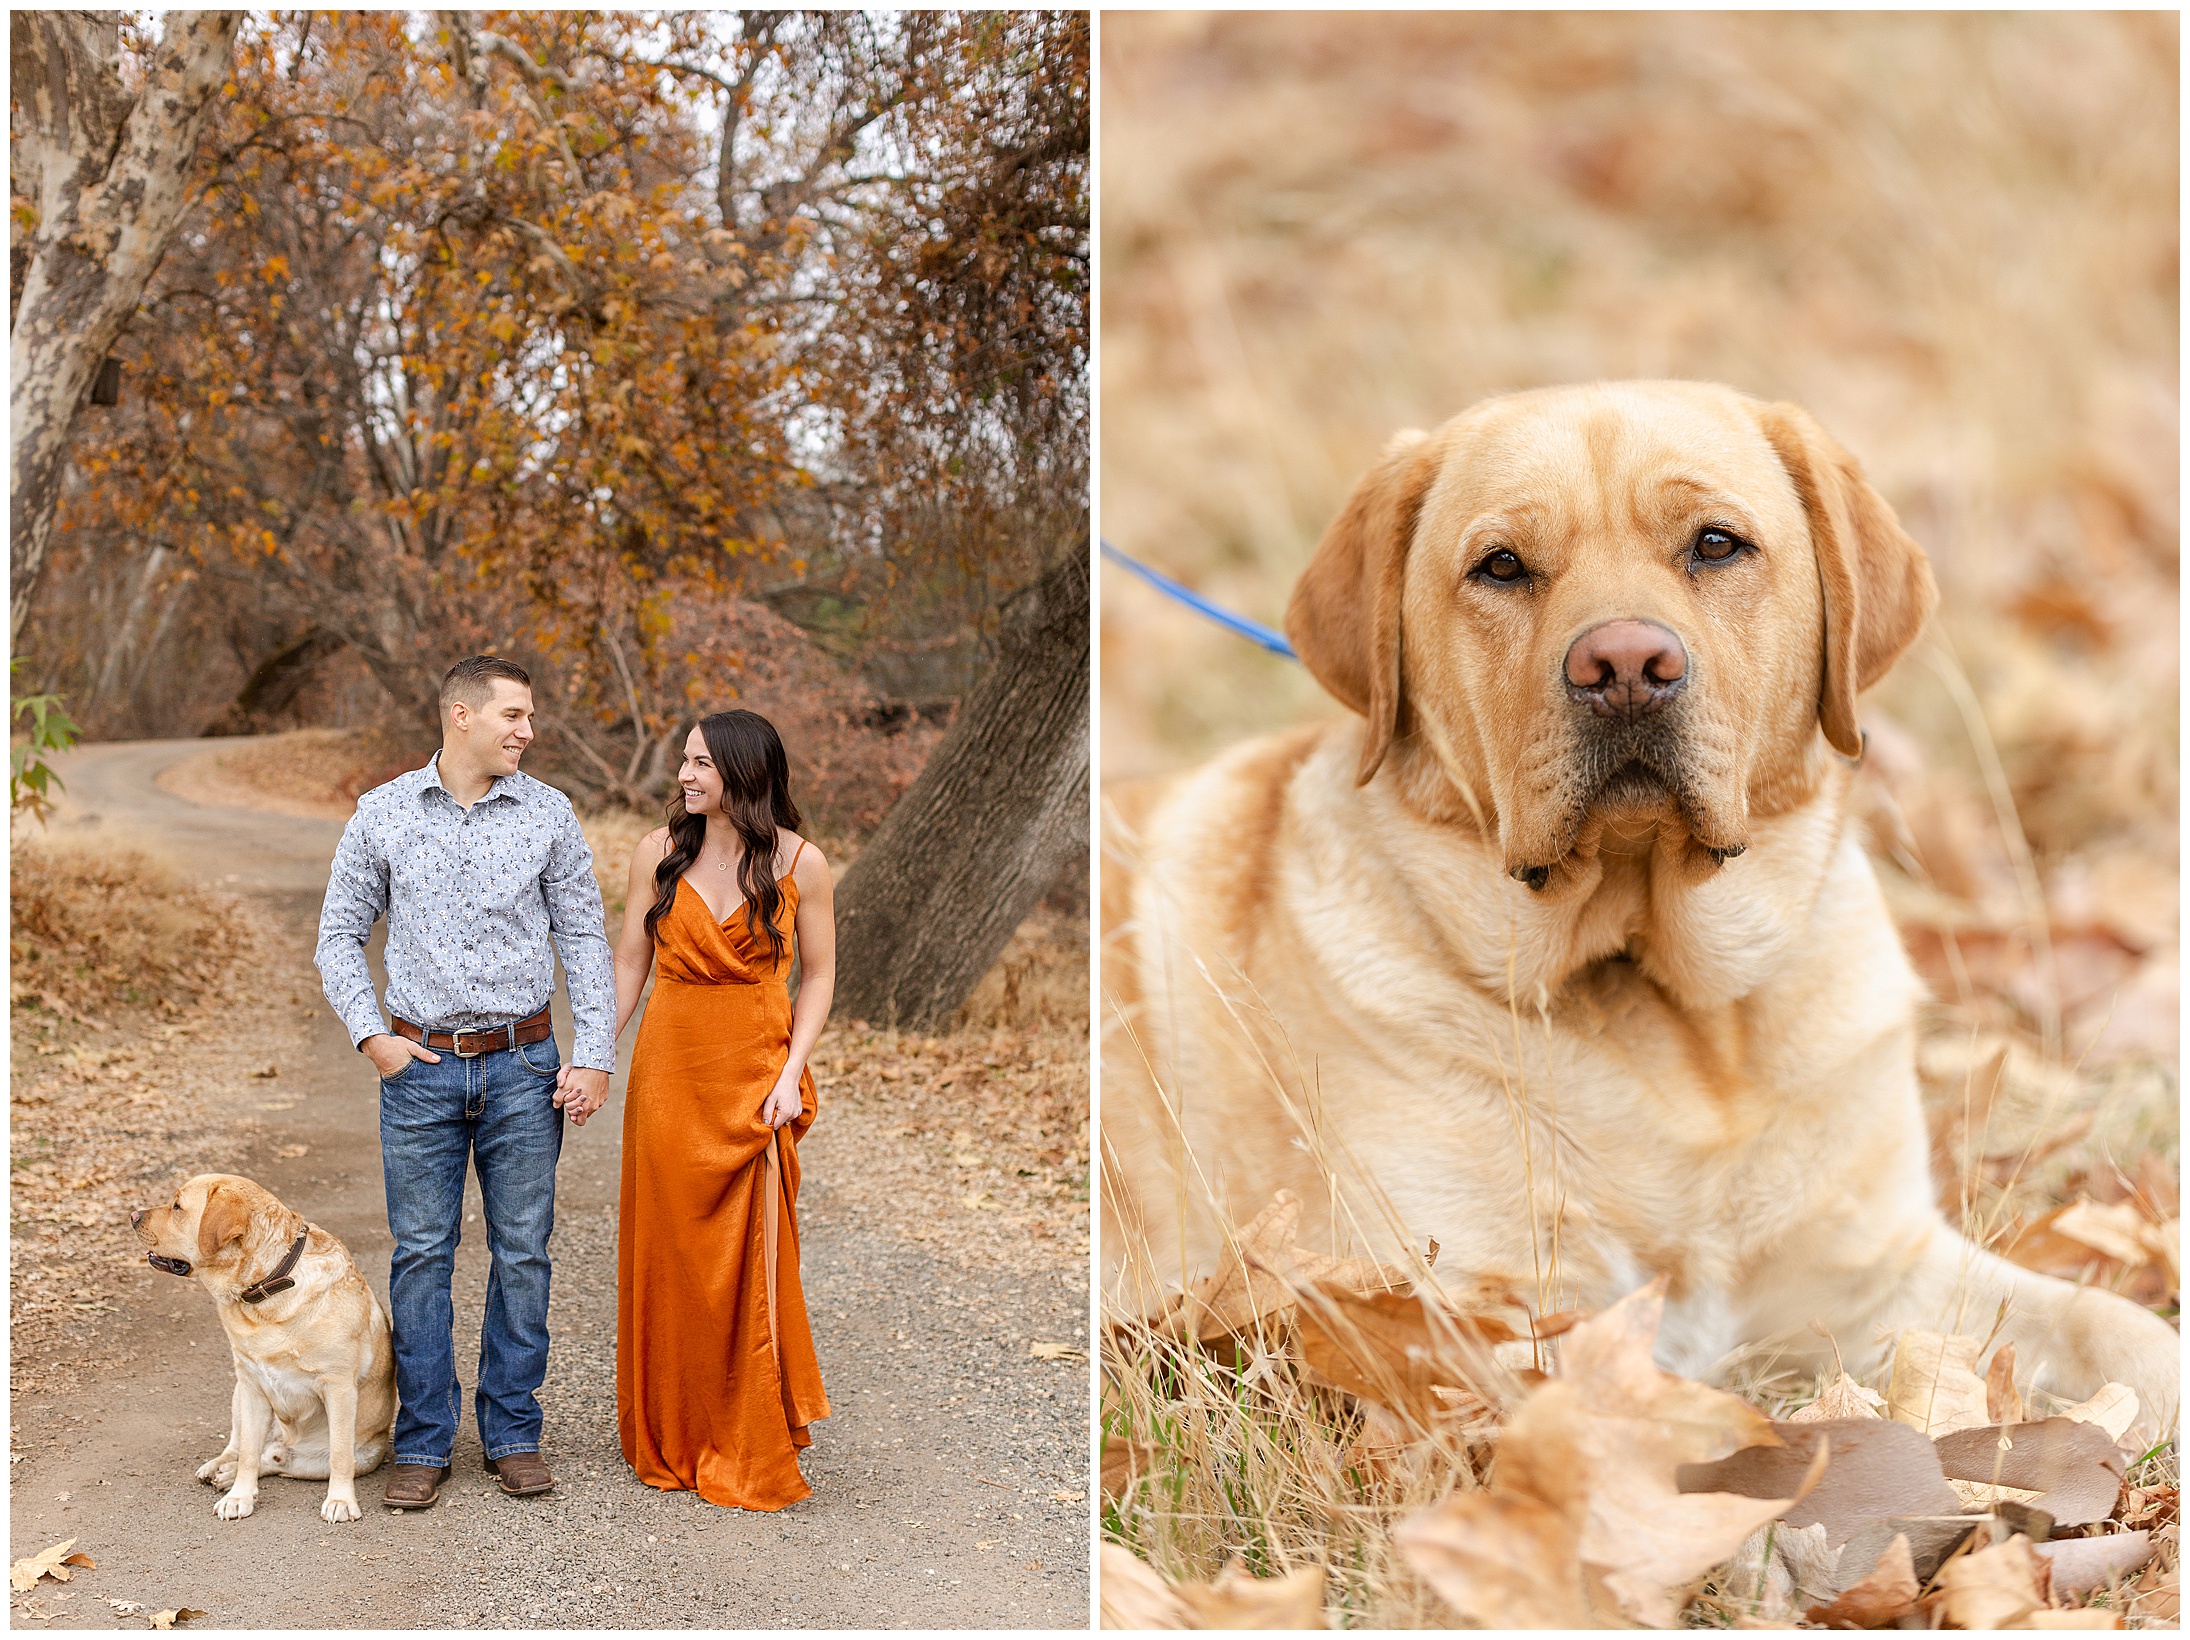 Bidwell Park Golf Course Engagement Session Winter Fall December Dog Champagne Orange Rust Teal,